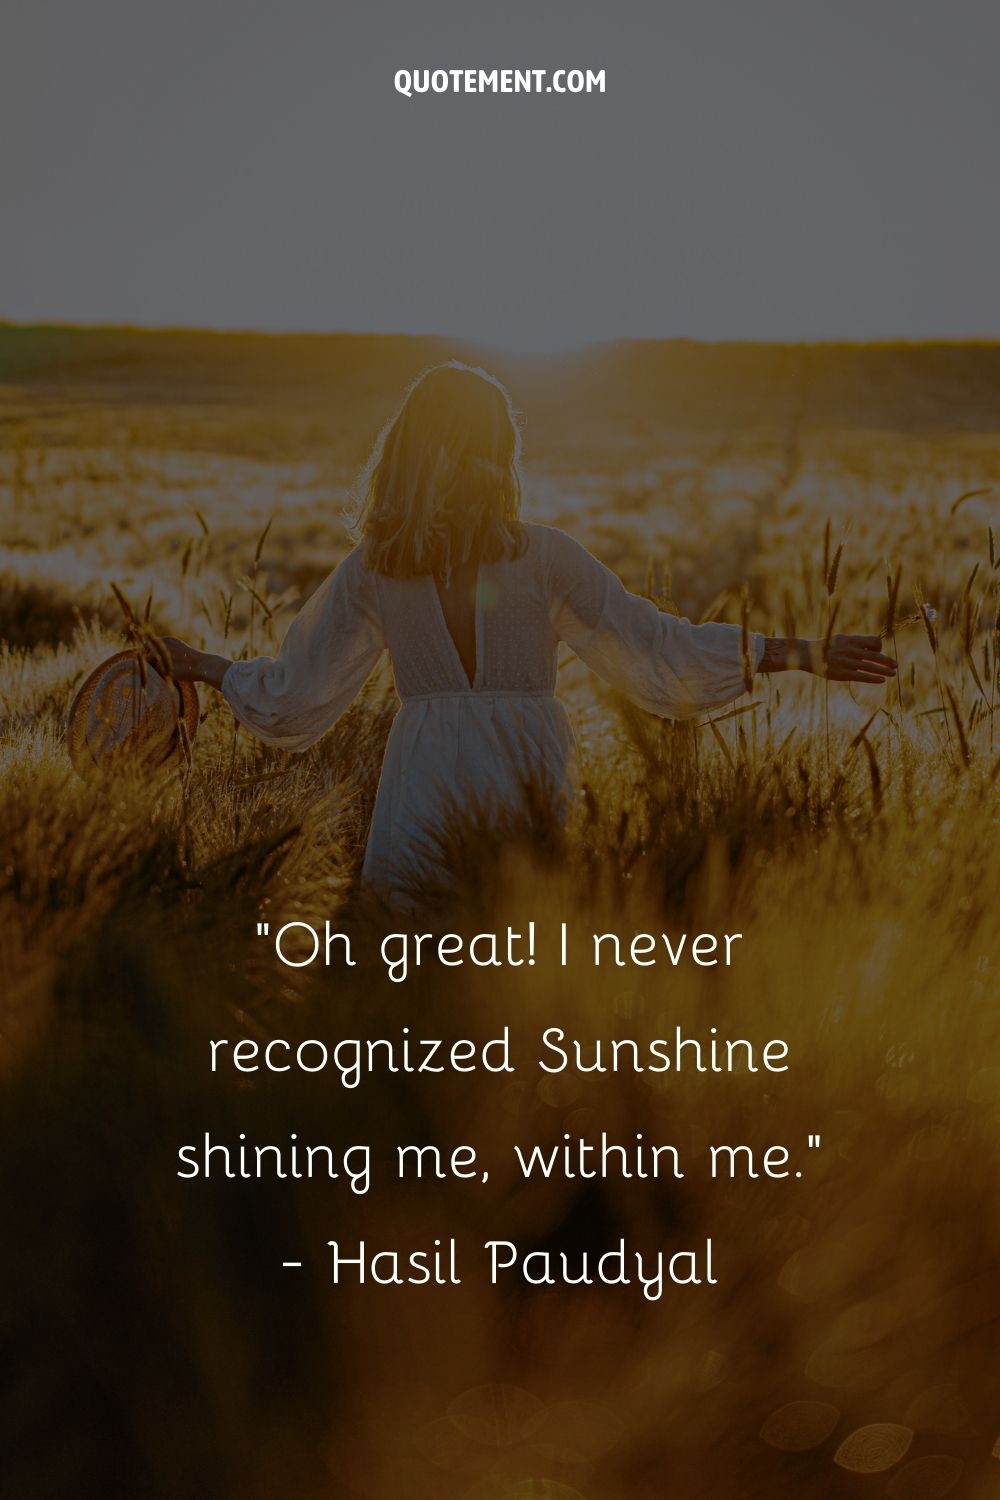 Oh great! I never recognized Sunshine shining me, within me